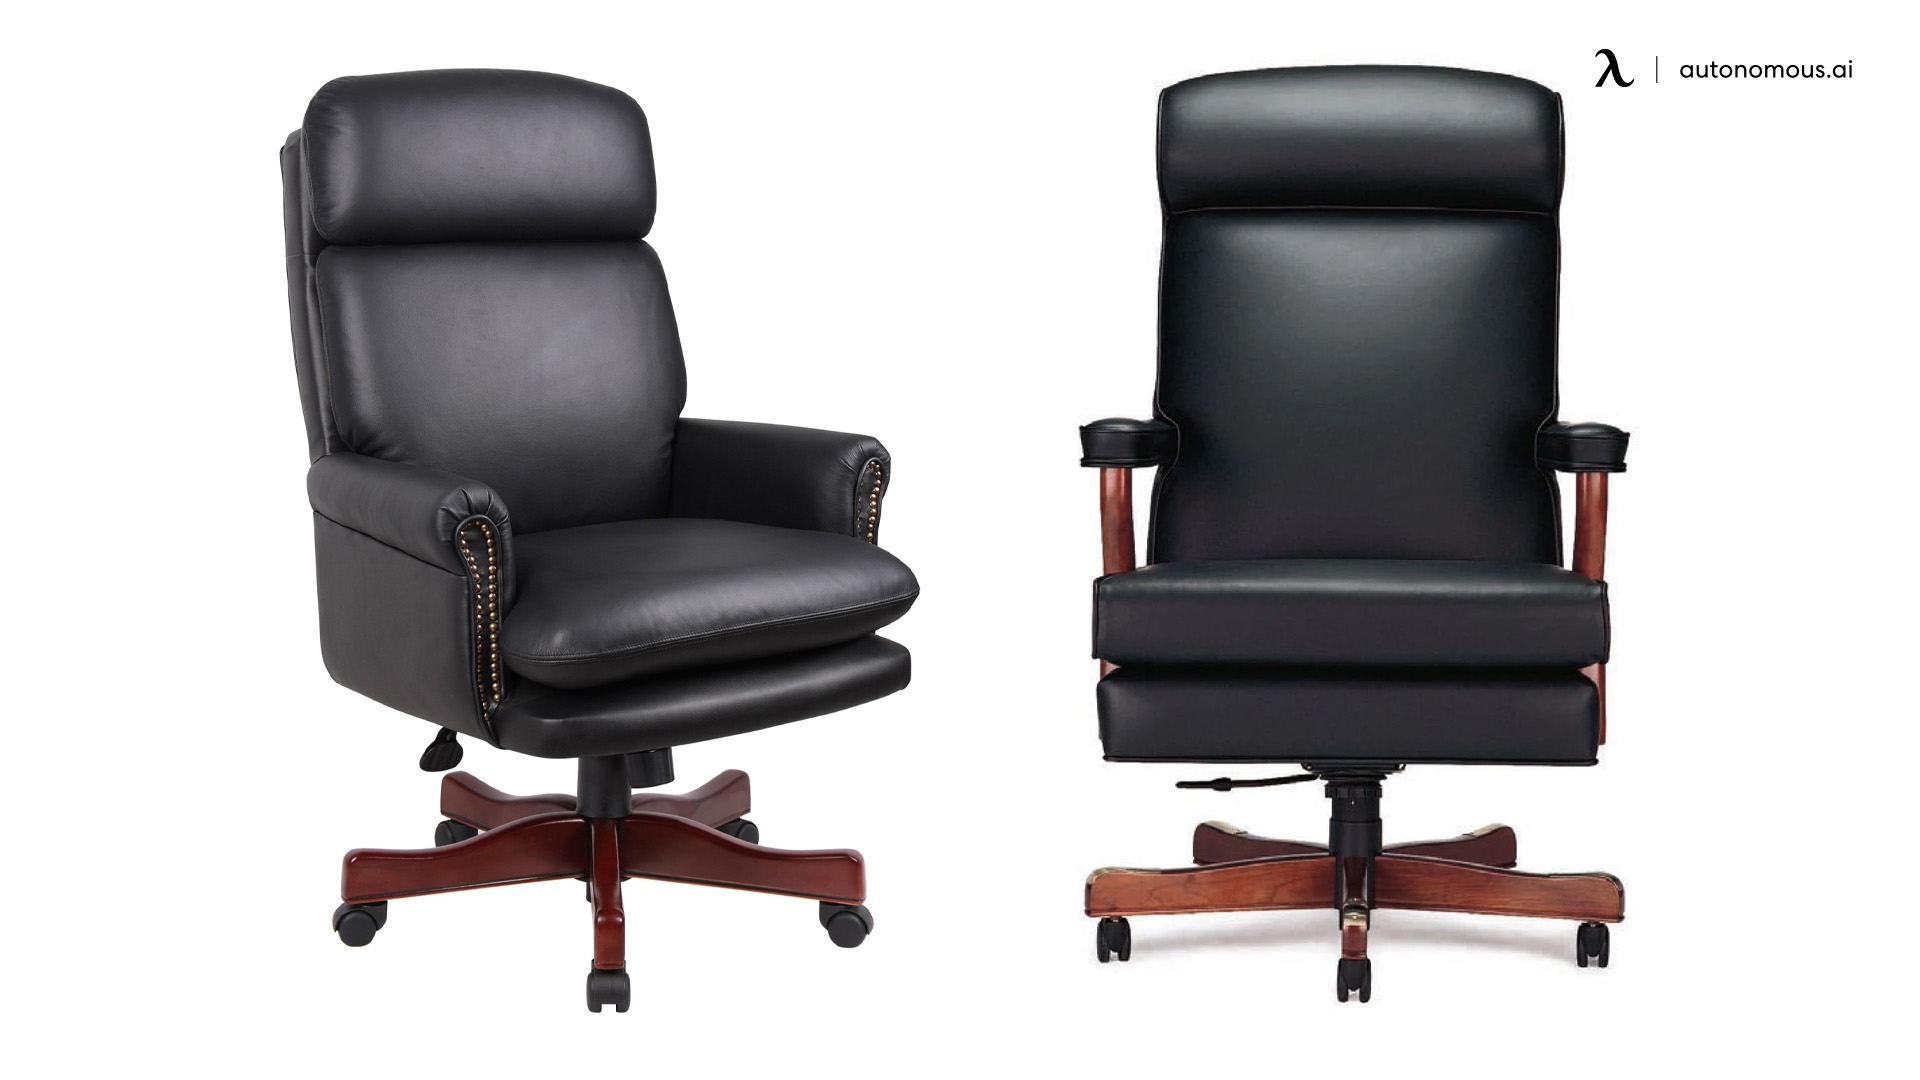 Top 5 Conference Room Chairs for Office in 2021